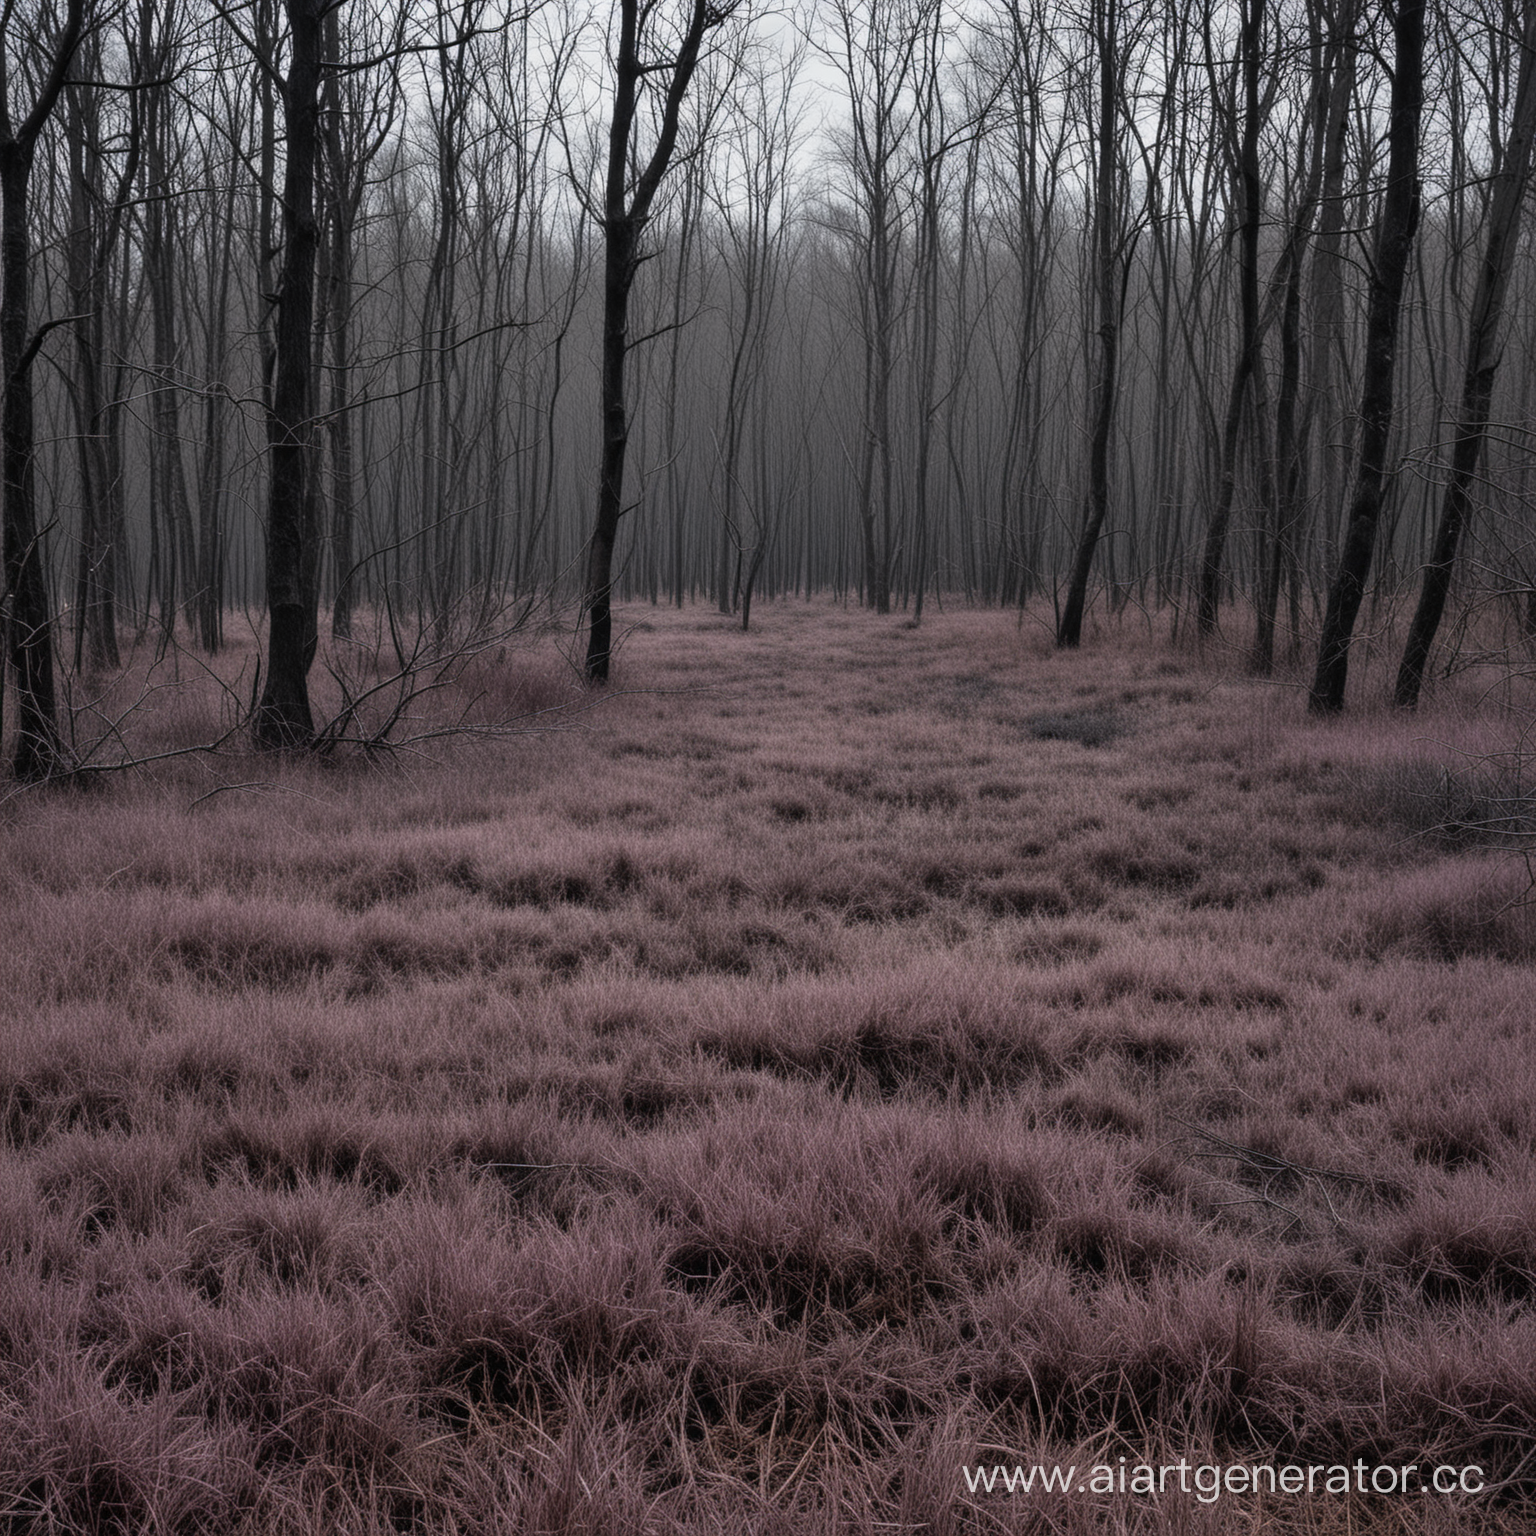 a dark clearing in front of the forest, purple, gray and black tones, withered withered grass, an atmosphere of abandonment